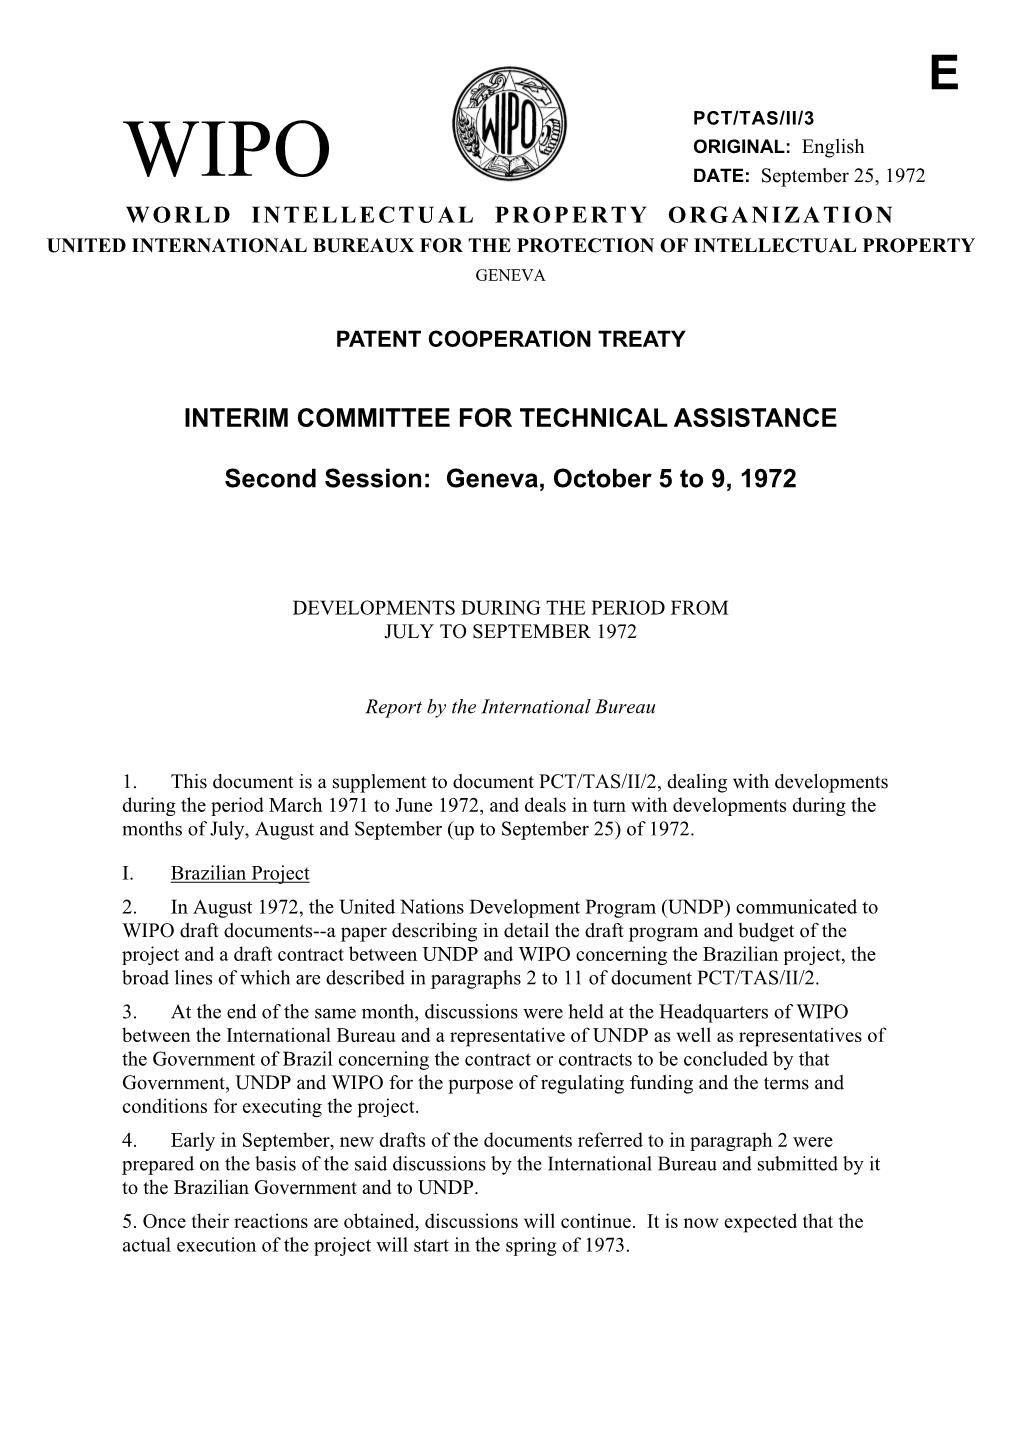 INTERIM COMMITTEE for TECHNICAL ASSISTANCE Second